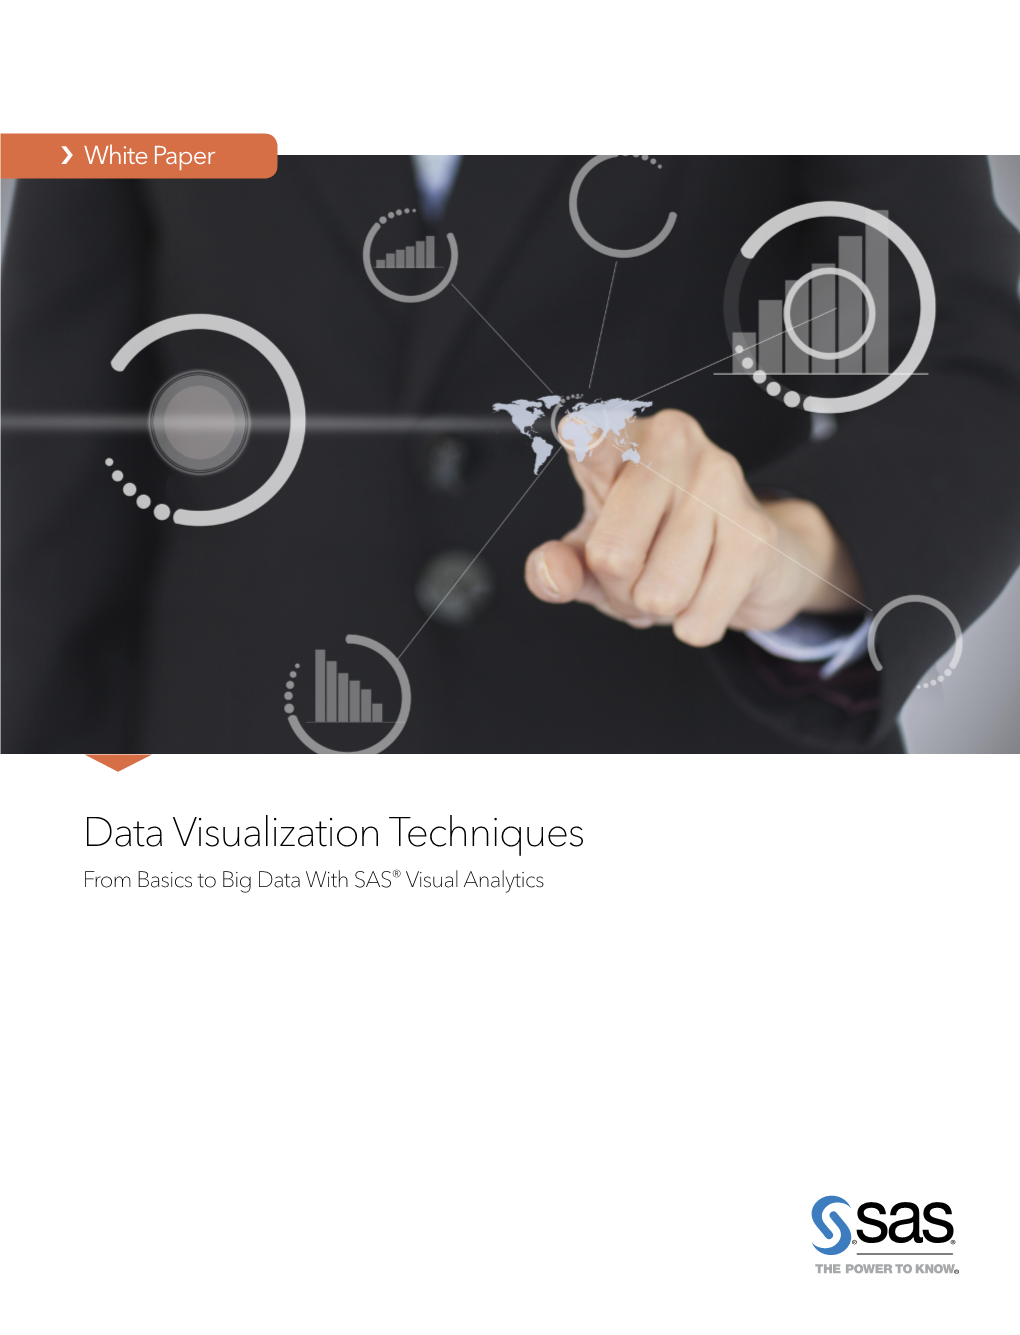 Data Visualization Techniques from Basics to Big Data with SAS® Visual Analytics Contents